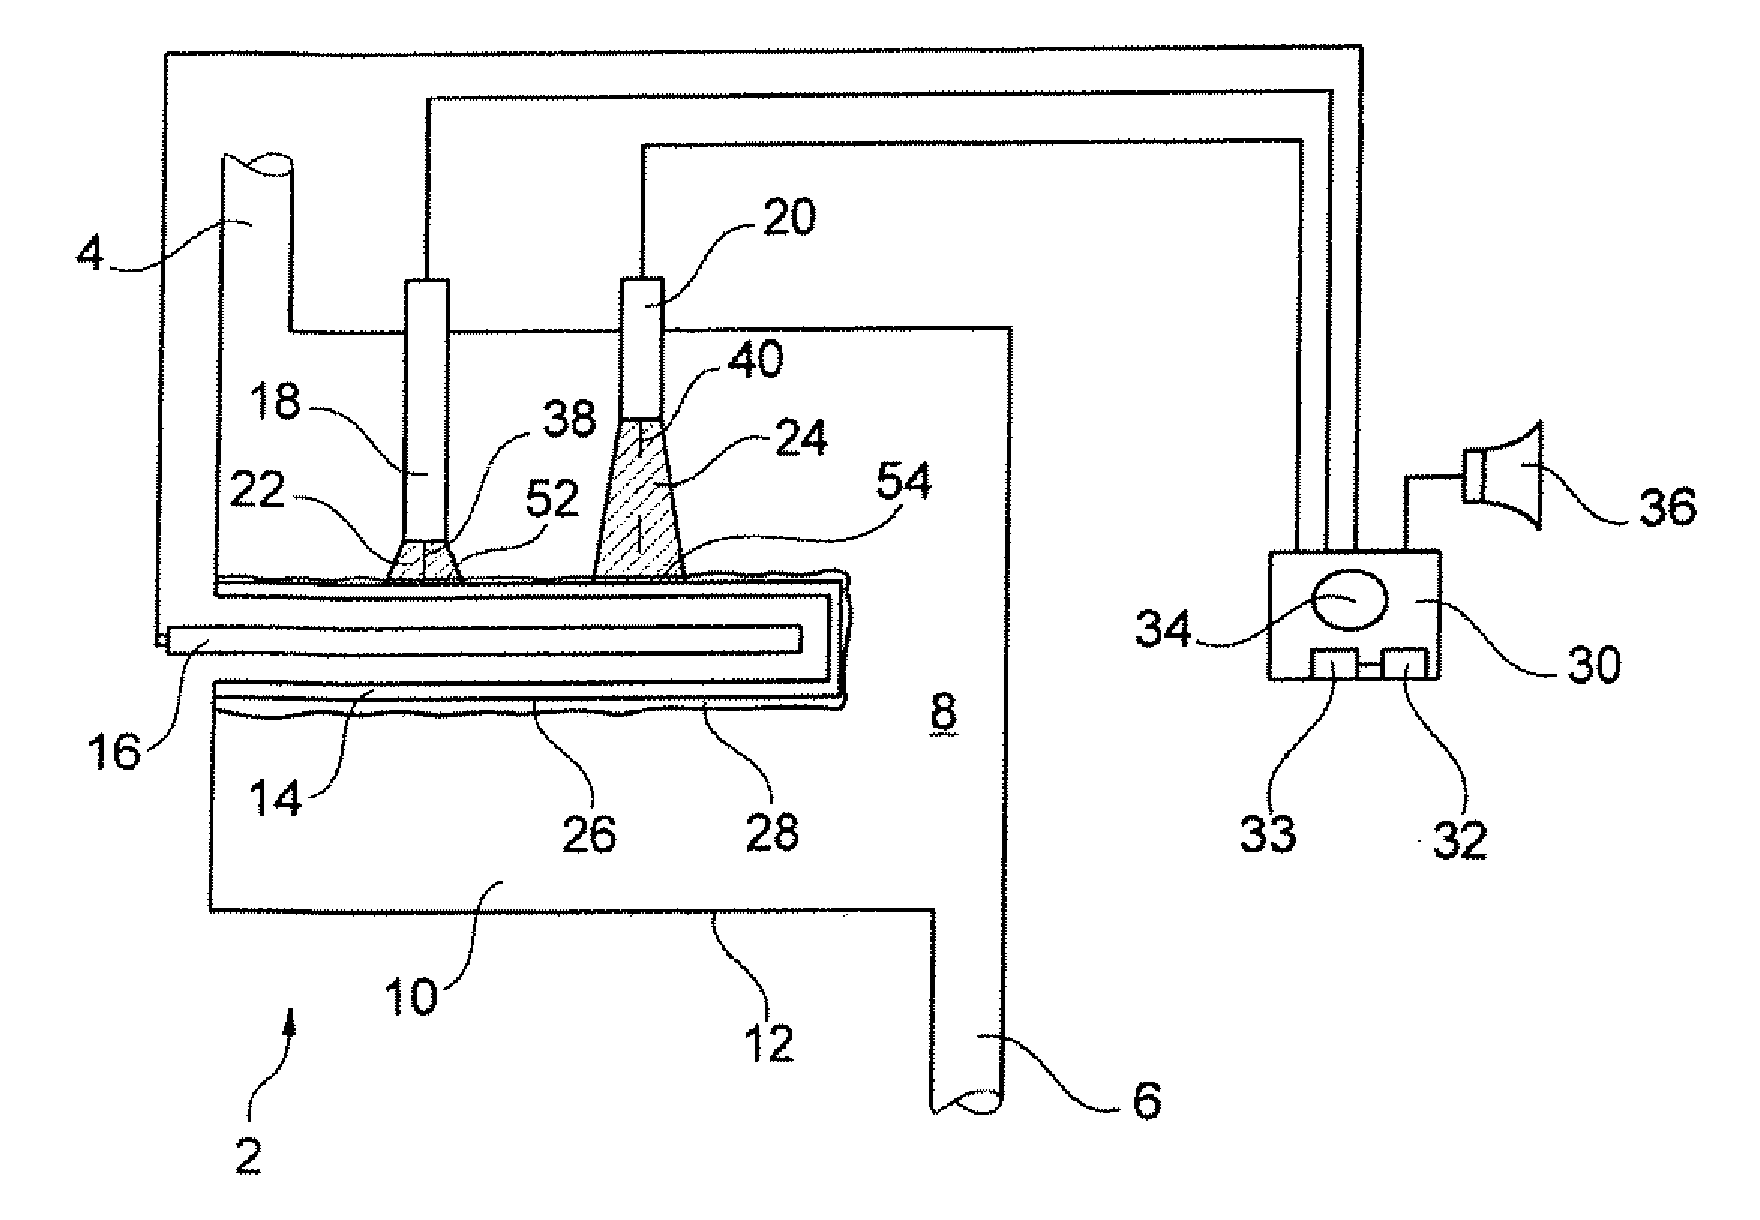 Method and device for easily monitoring the maintenance status of an uv-drinking water disinfection system in an aircraft